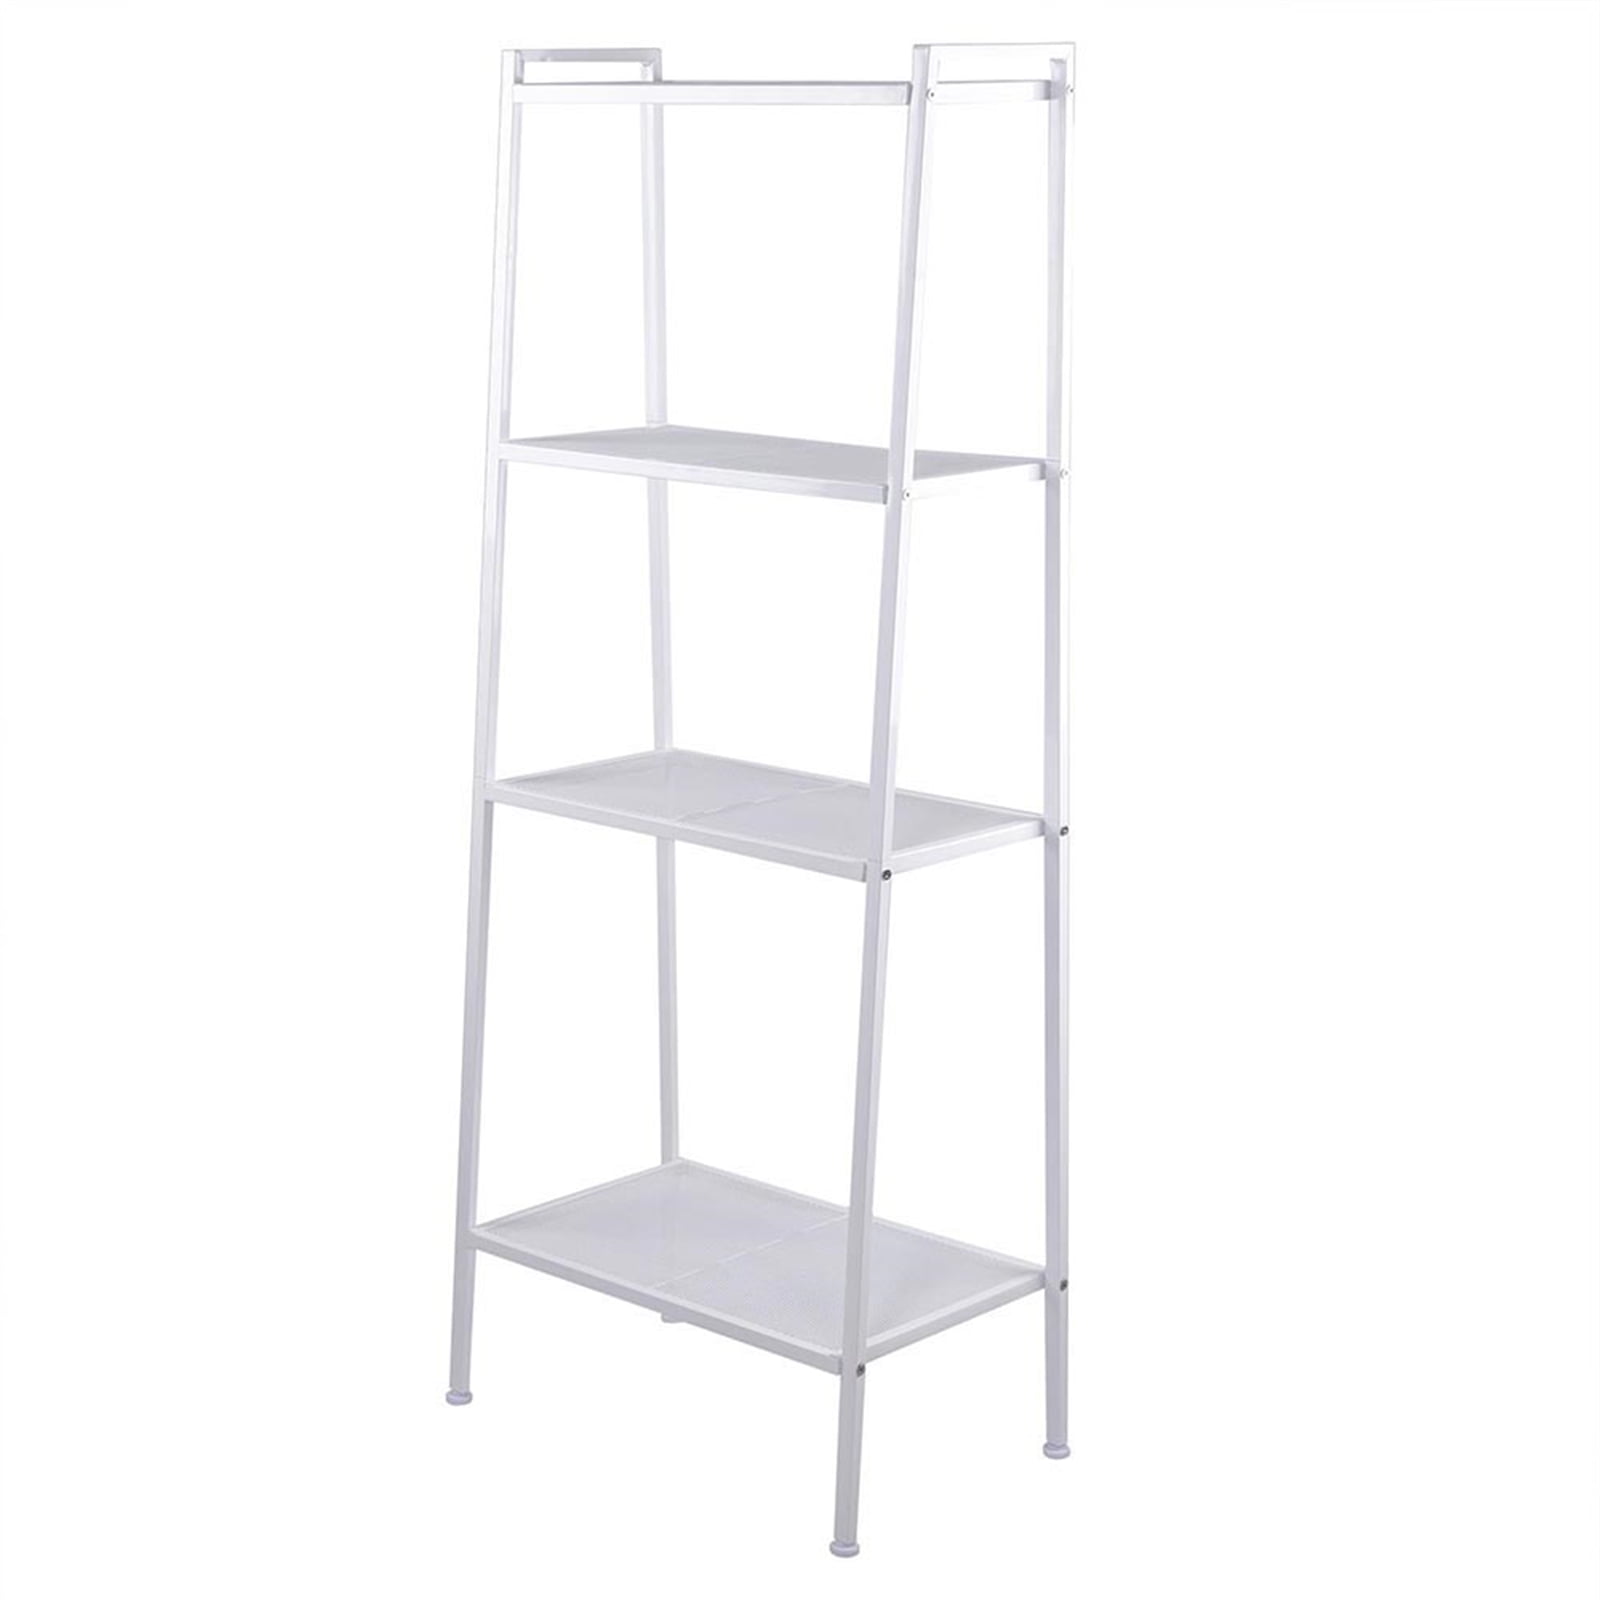 Focus Foodservice FF2460C 24" X 60" Chrome Plated Wire Shelf for sale online 